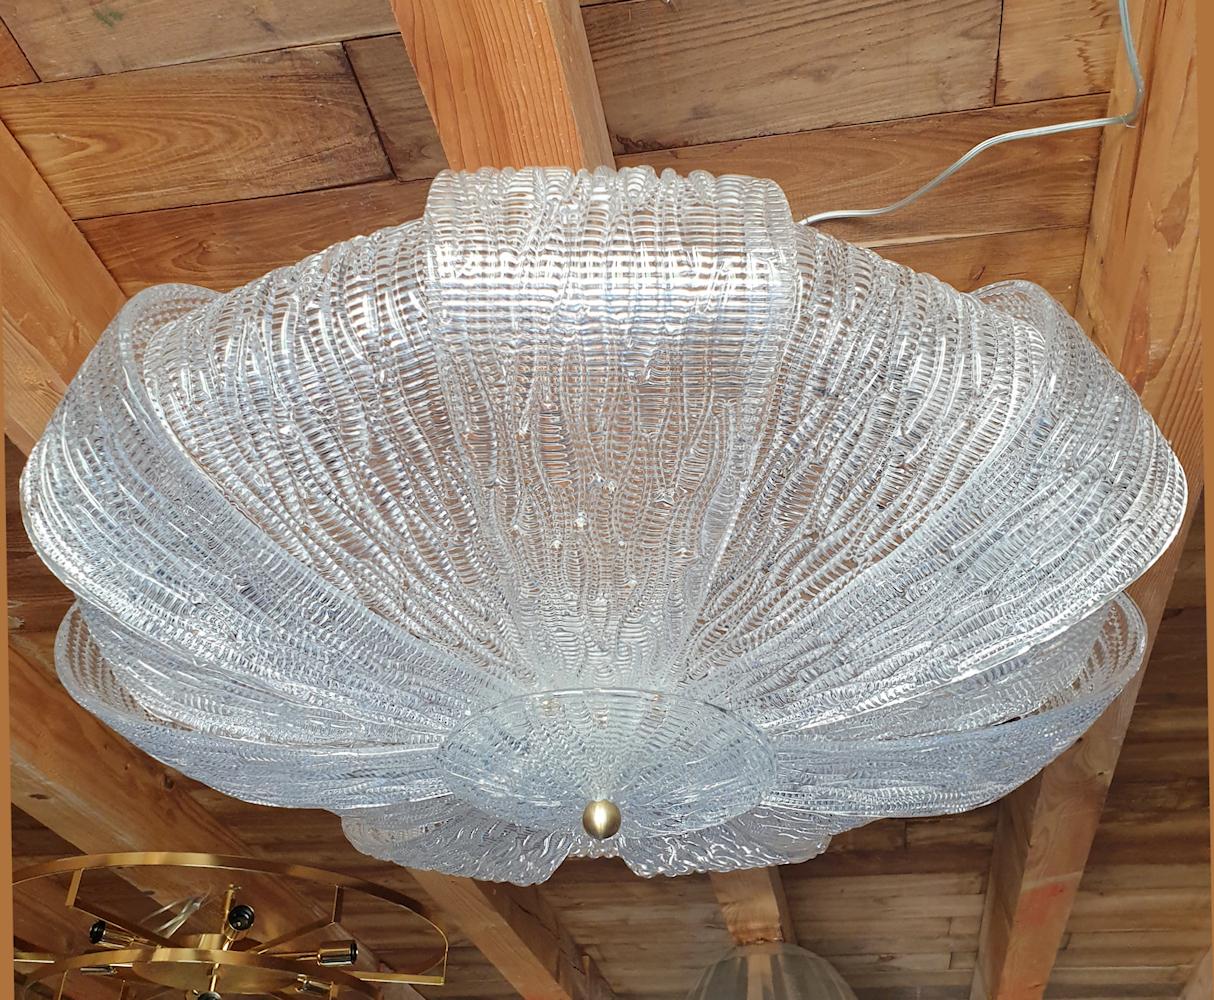 Very large Murano clear and textured glass flush mount chandelier, Mid-Century Modern, Barovier style, Italy, 1970s.
The vintage Murano chandelier has 8 lights, and has been rewired with medium base sockets, or E26.
A chain can be added, to hang